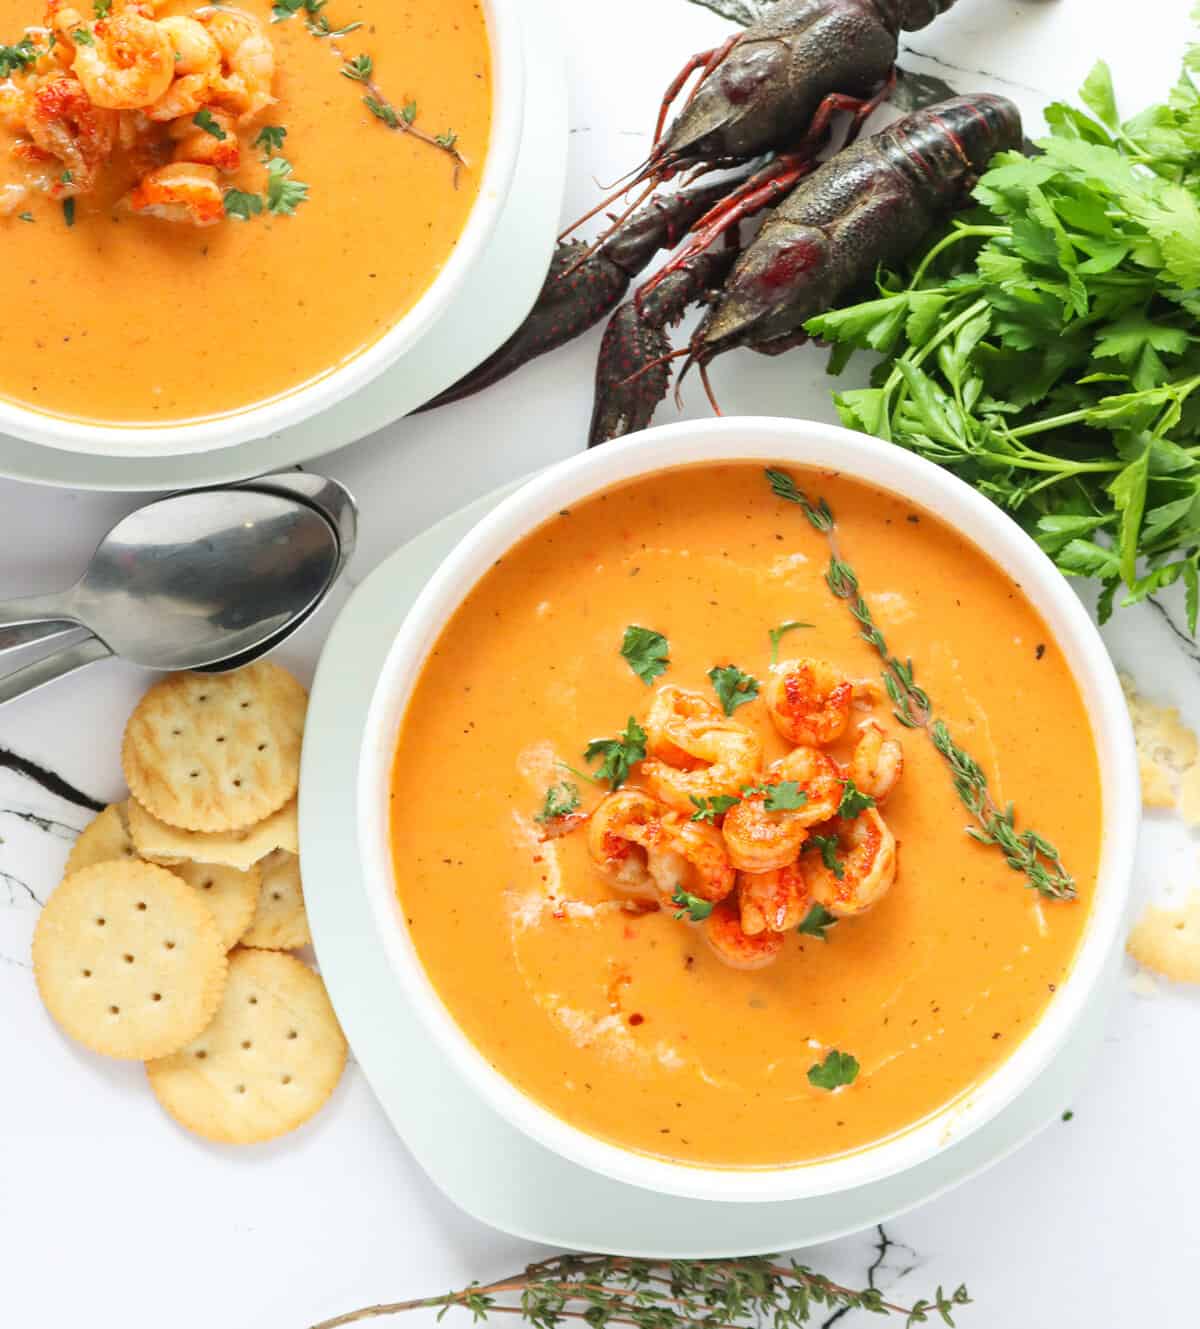 Two bowls of creamy, hot crawfish bisque ready to enjoy with crayfish in the background